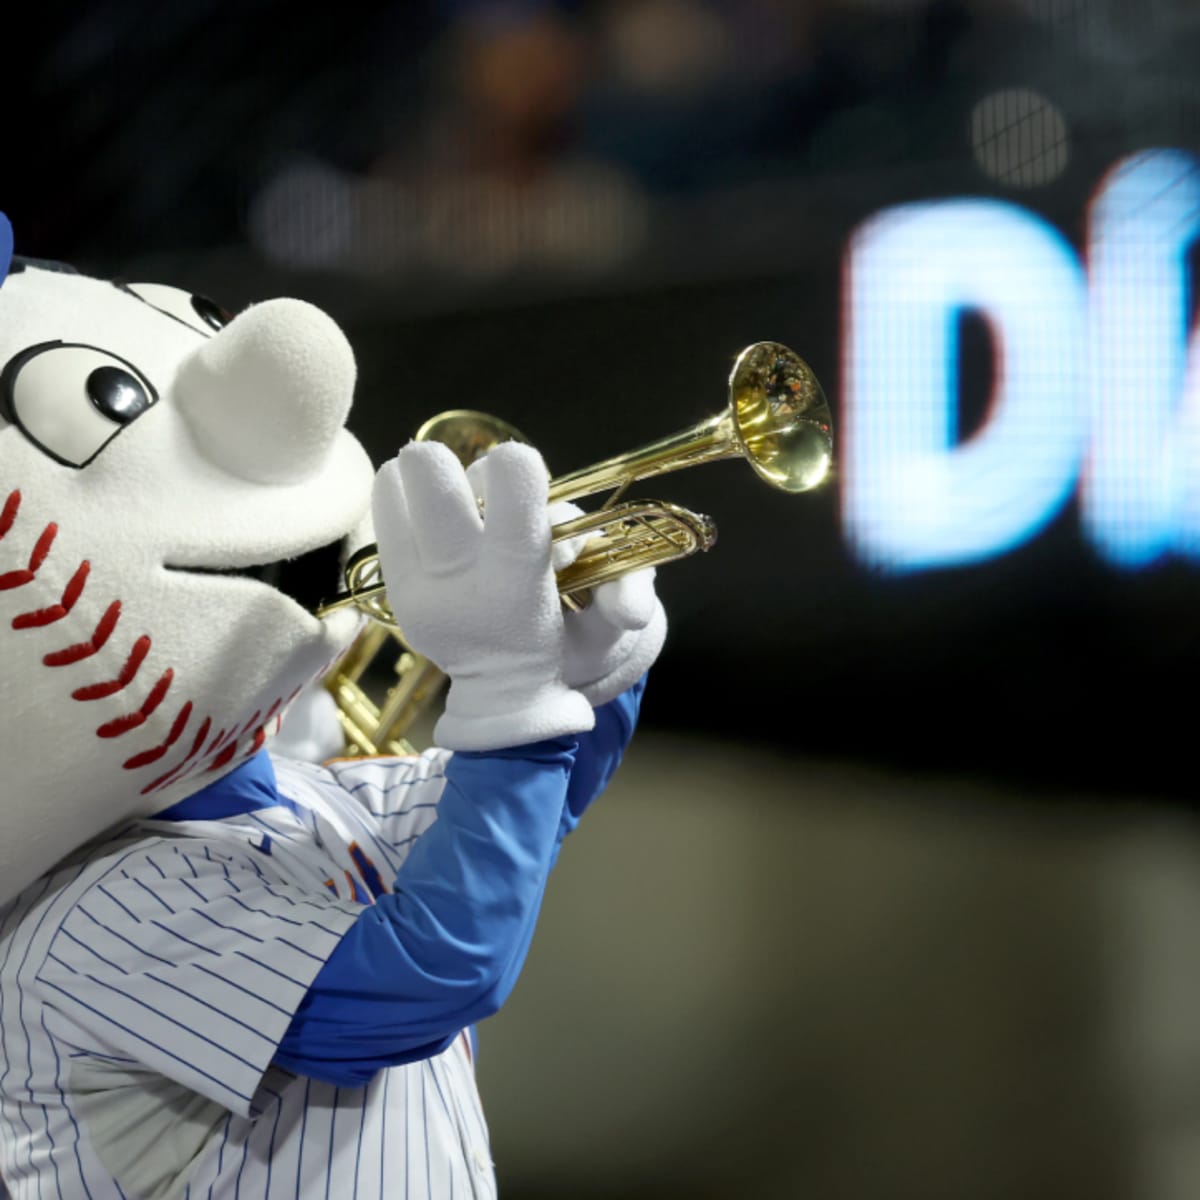 Timmy Trumpet coming to Mets game, could play song for Díaz